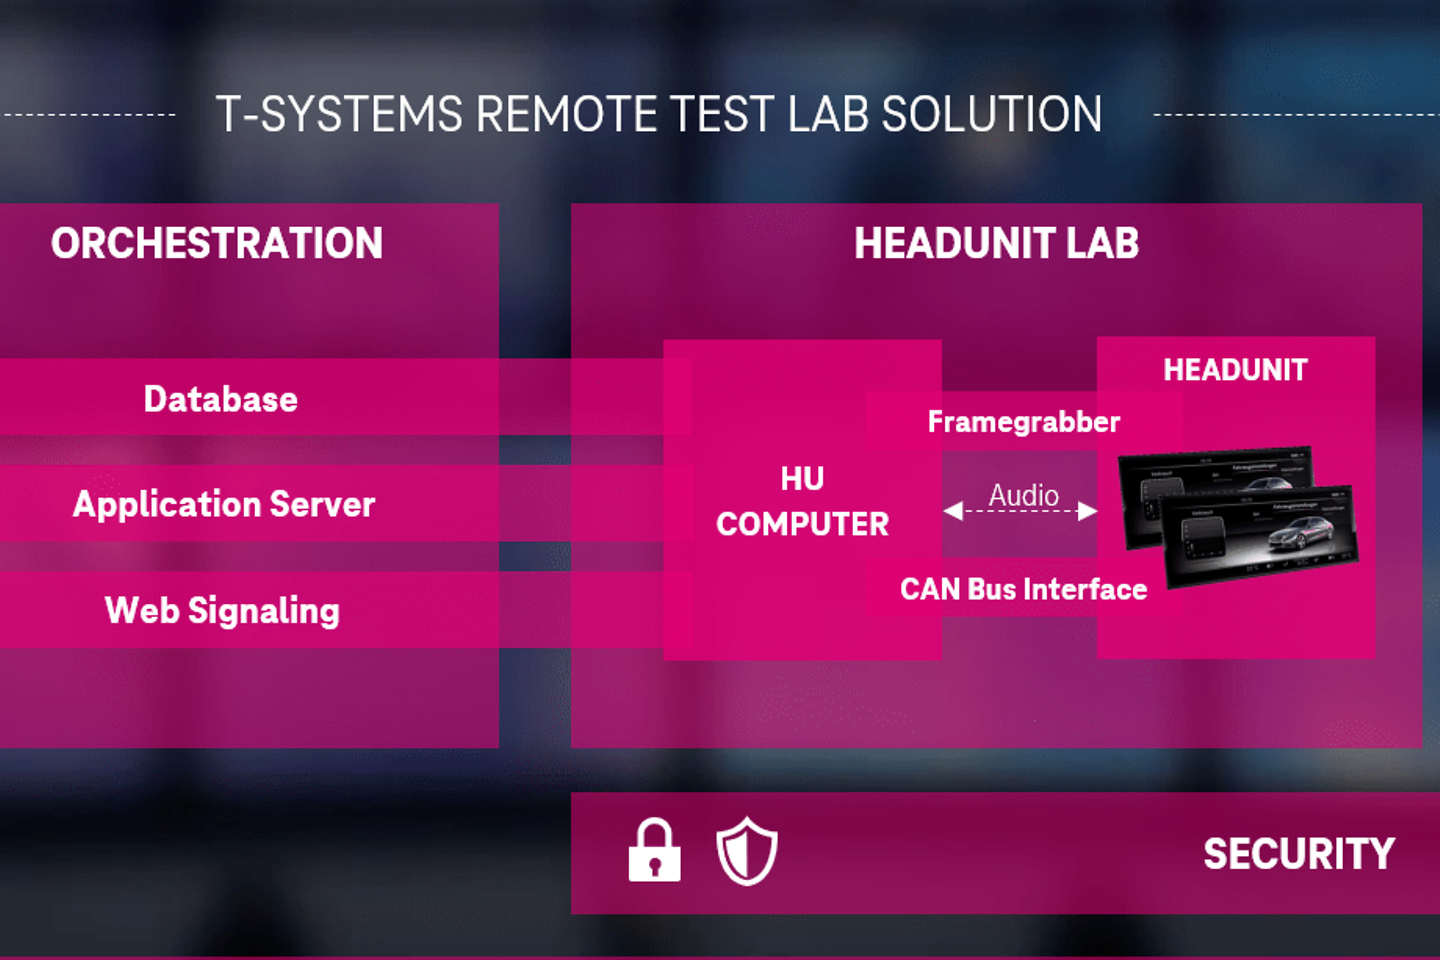 remote testlab solution process showing steps: Remote client-orchestration-headunit lab-over the air supply